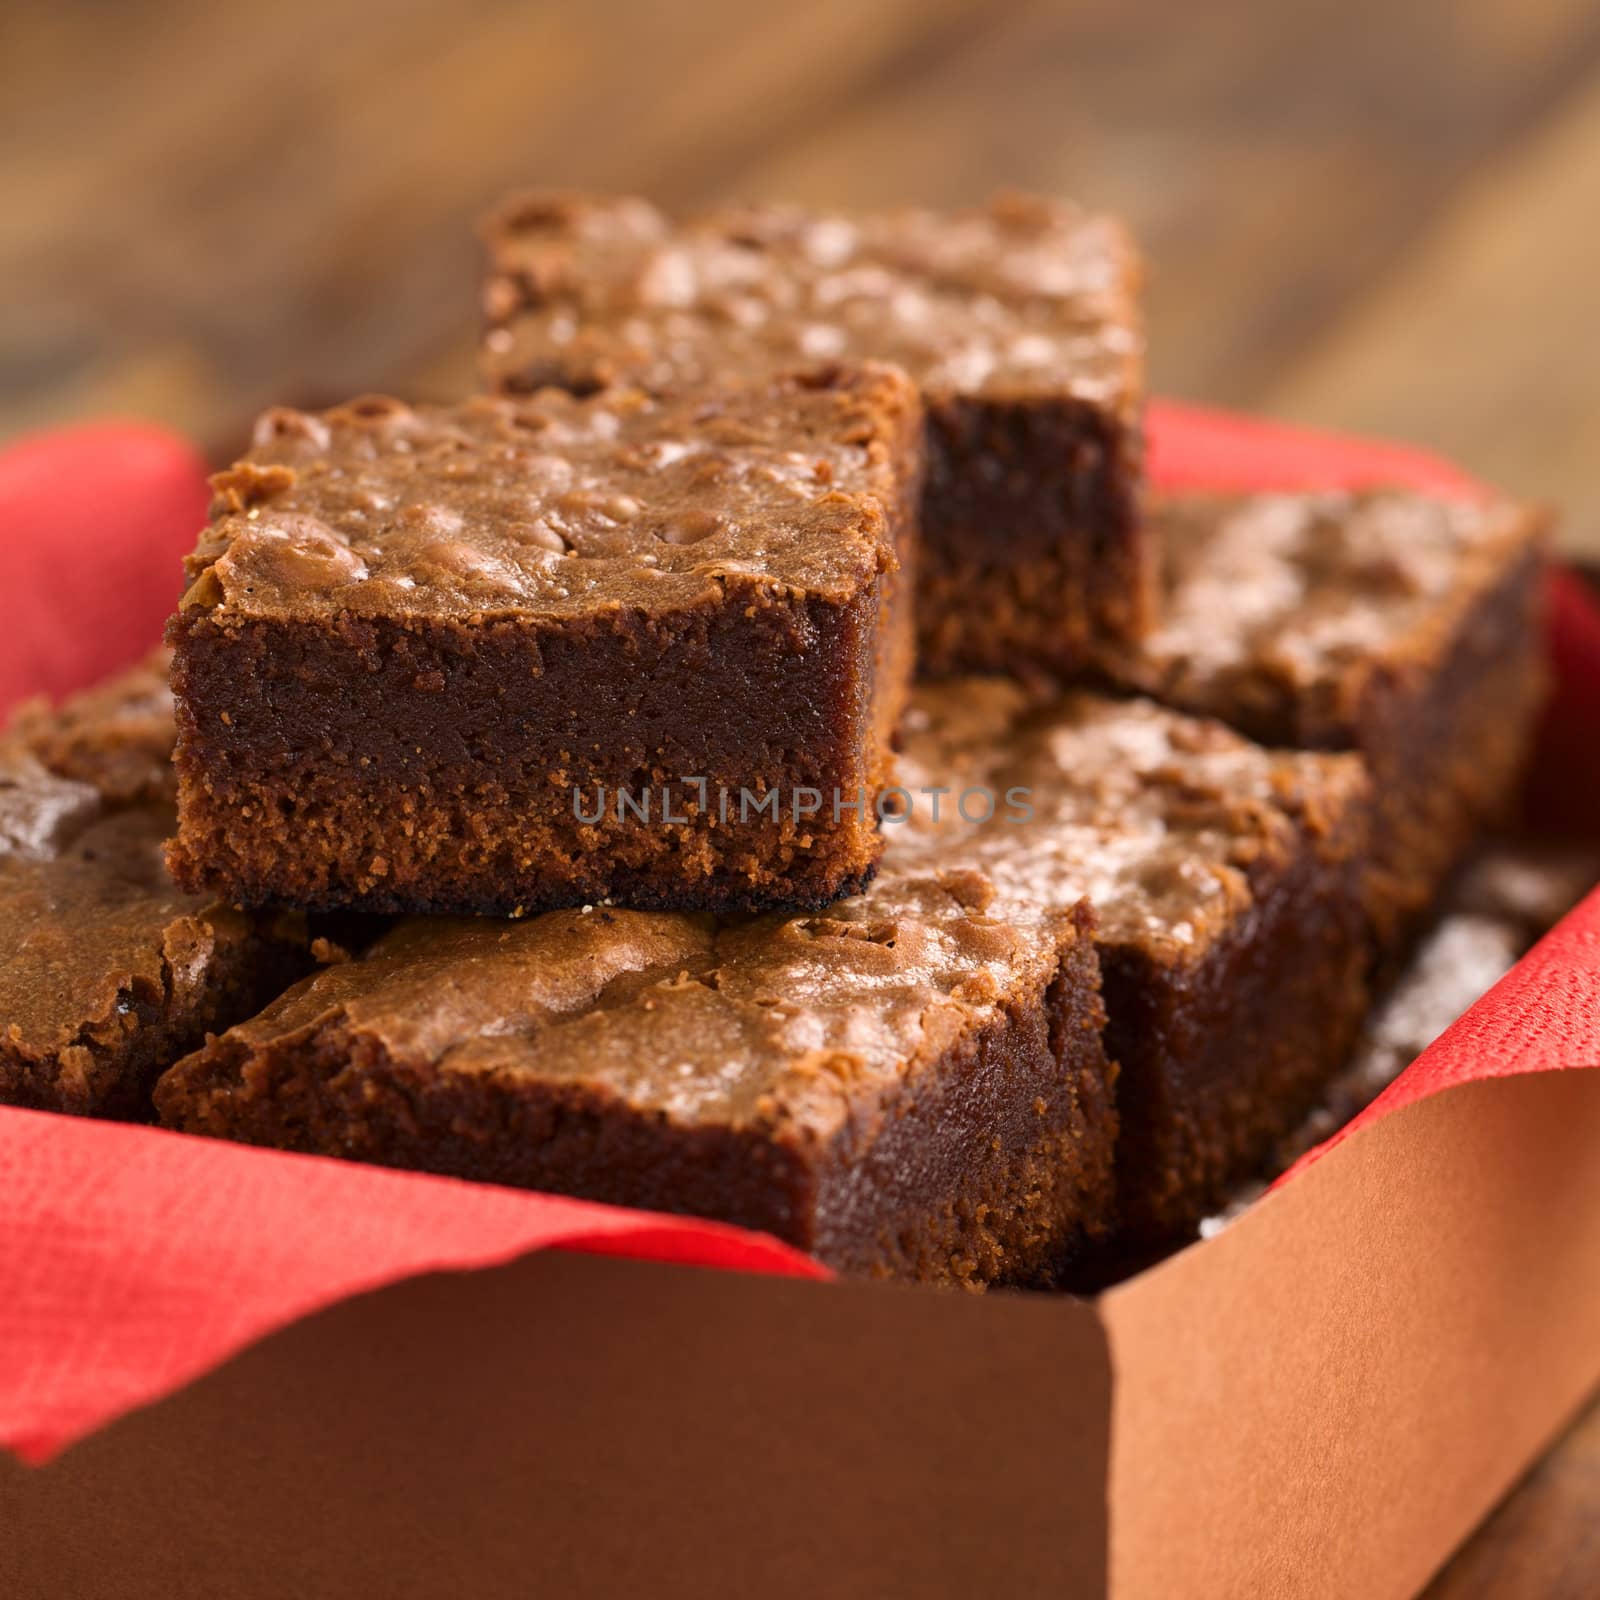 Freshly baked brownies in a brown paper box with red napkin (Selective Focus, Focus on the first brownie on the top)